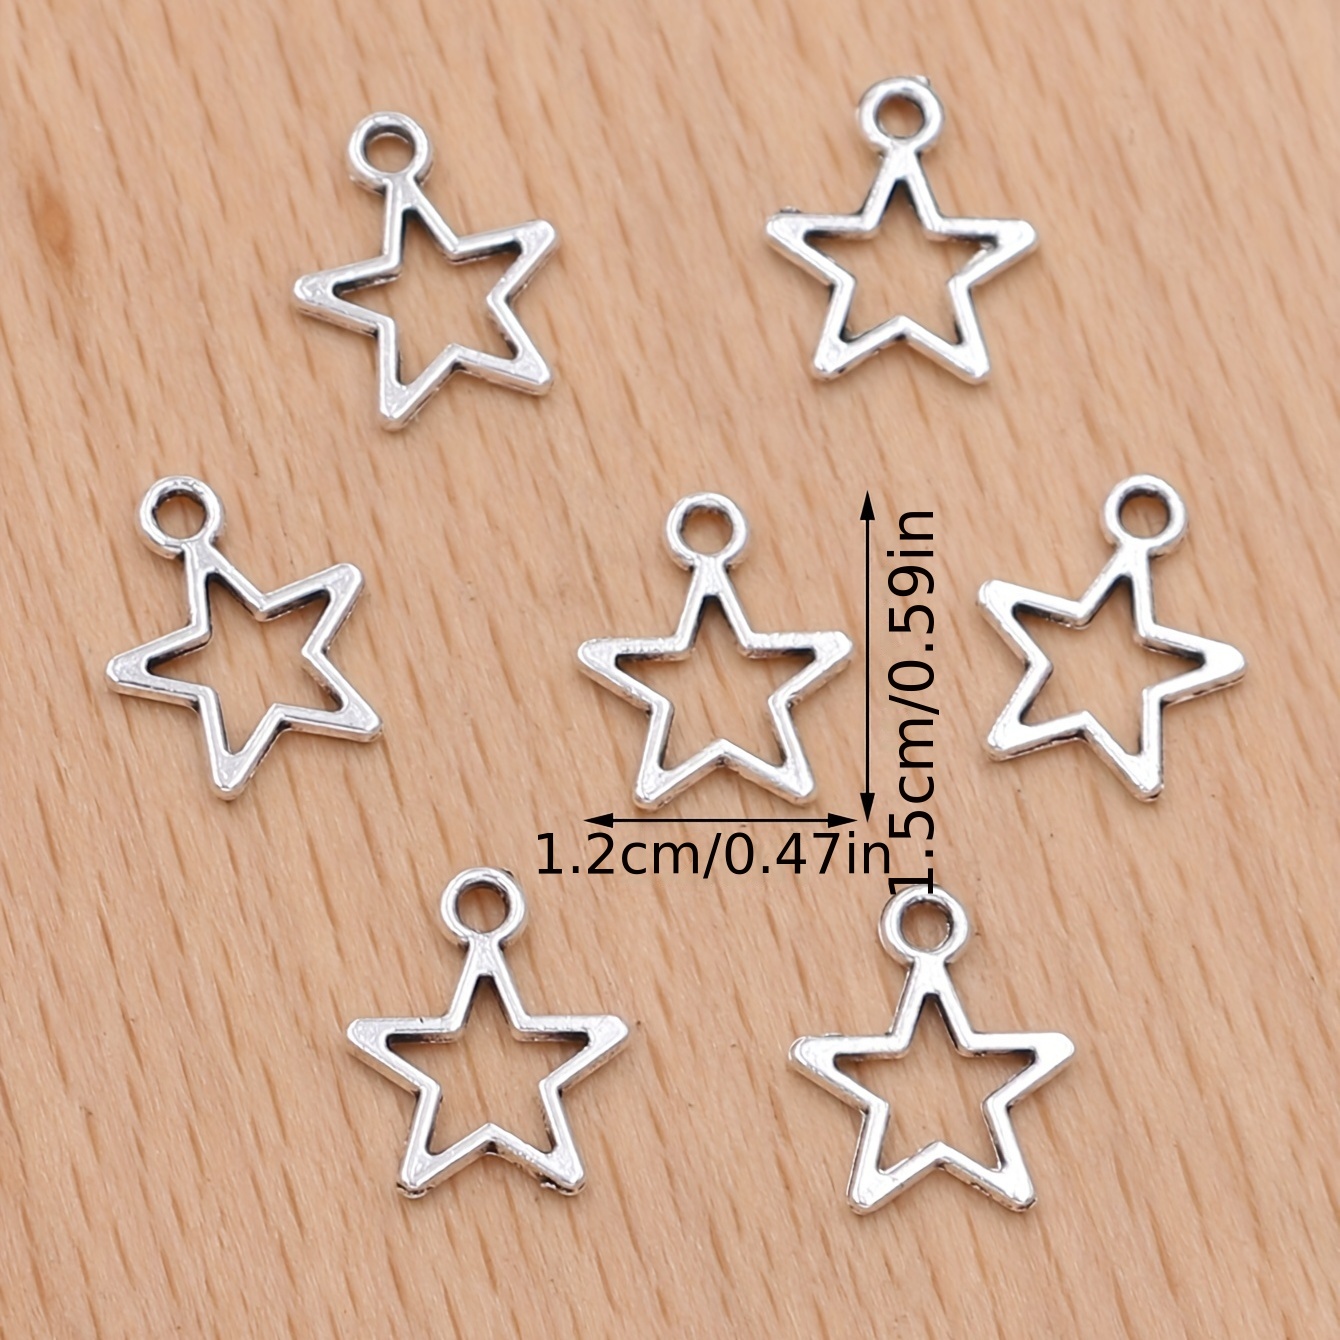 10 Pcs Lot, 20x22mm Star Charms for Jewelry Making Shiny Silver